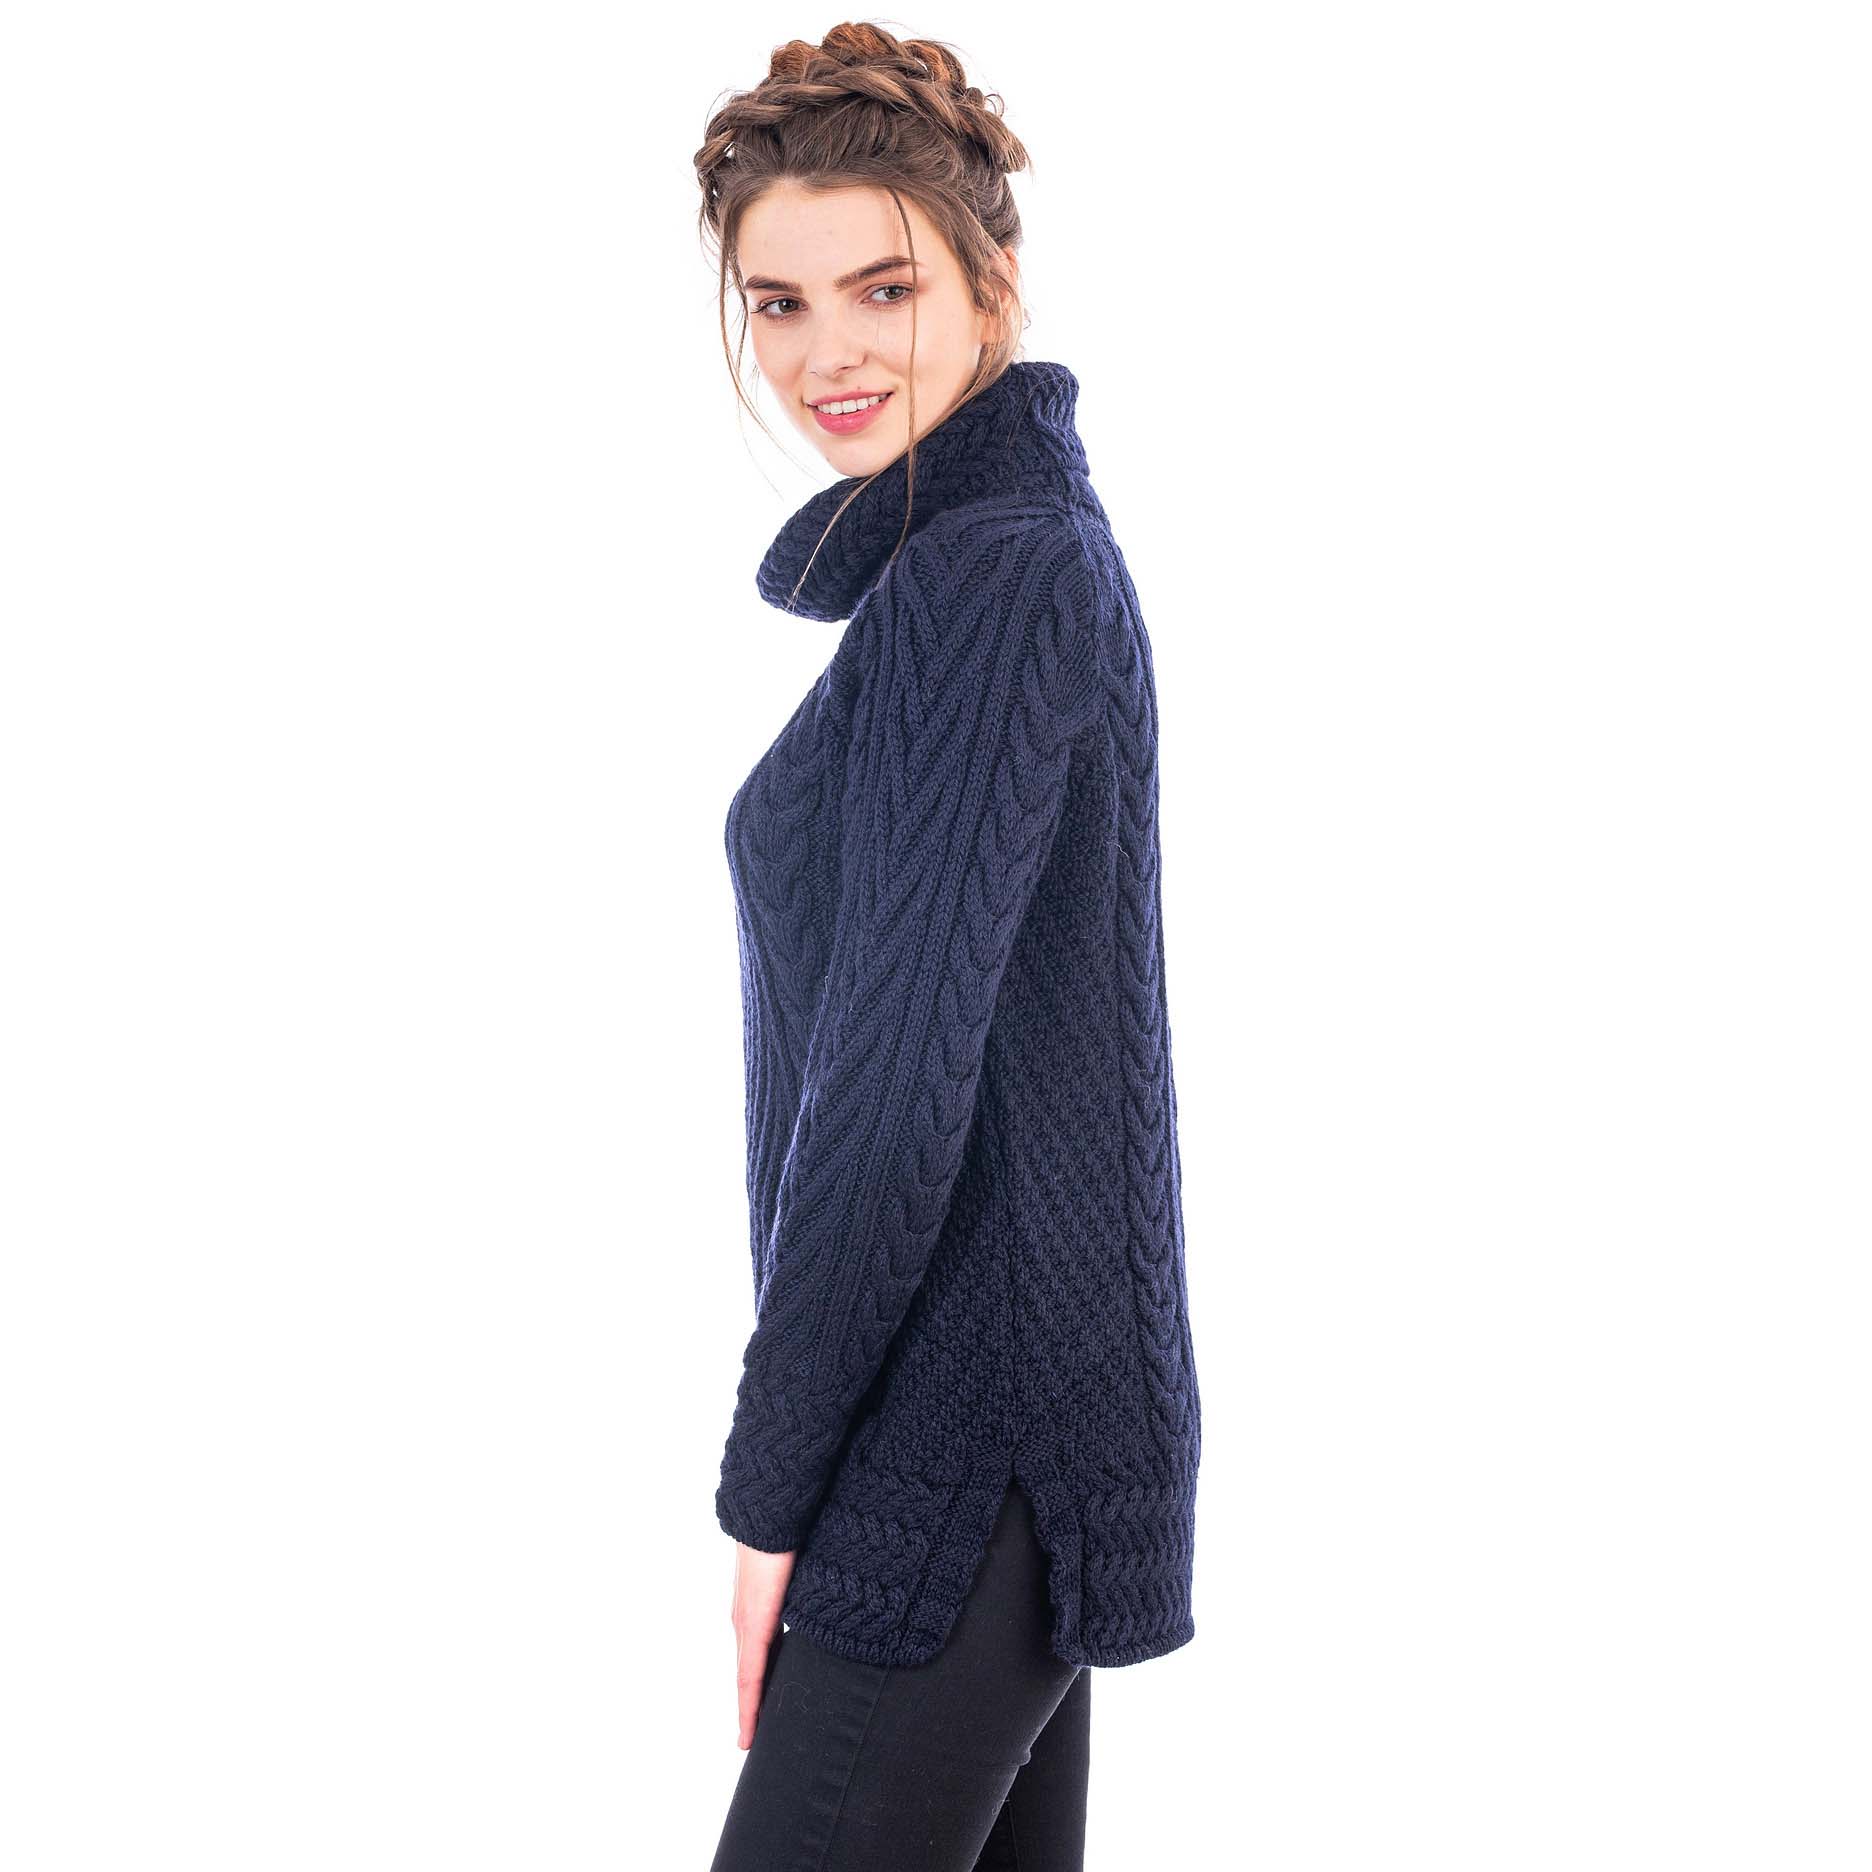 Irish Sweater | Ribbed Cable Knit Turtleneck Ladies Sweater at ...